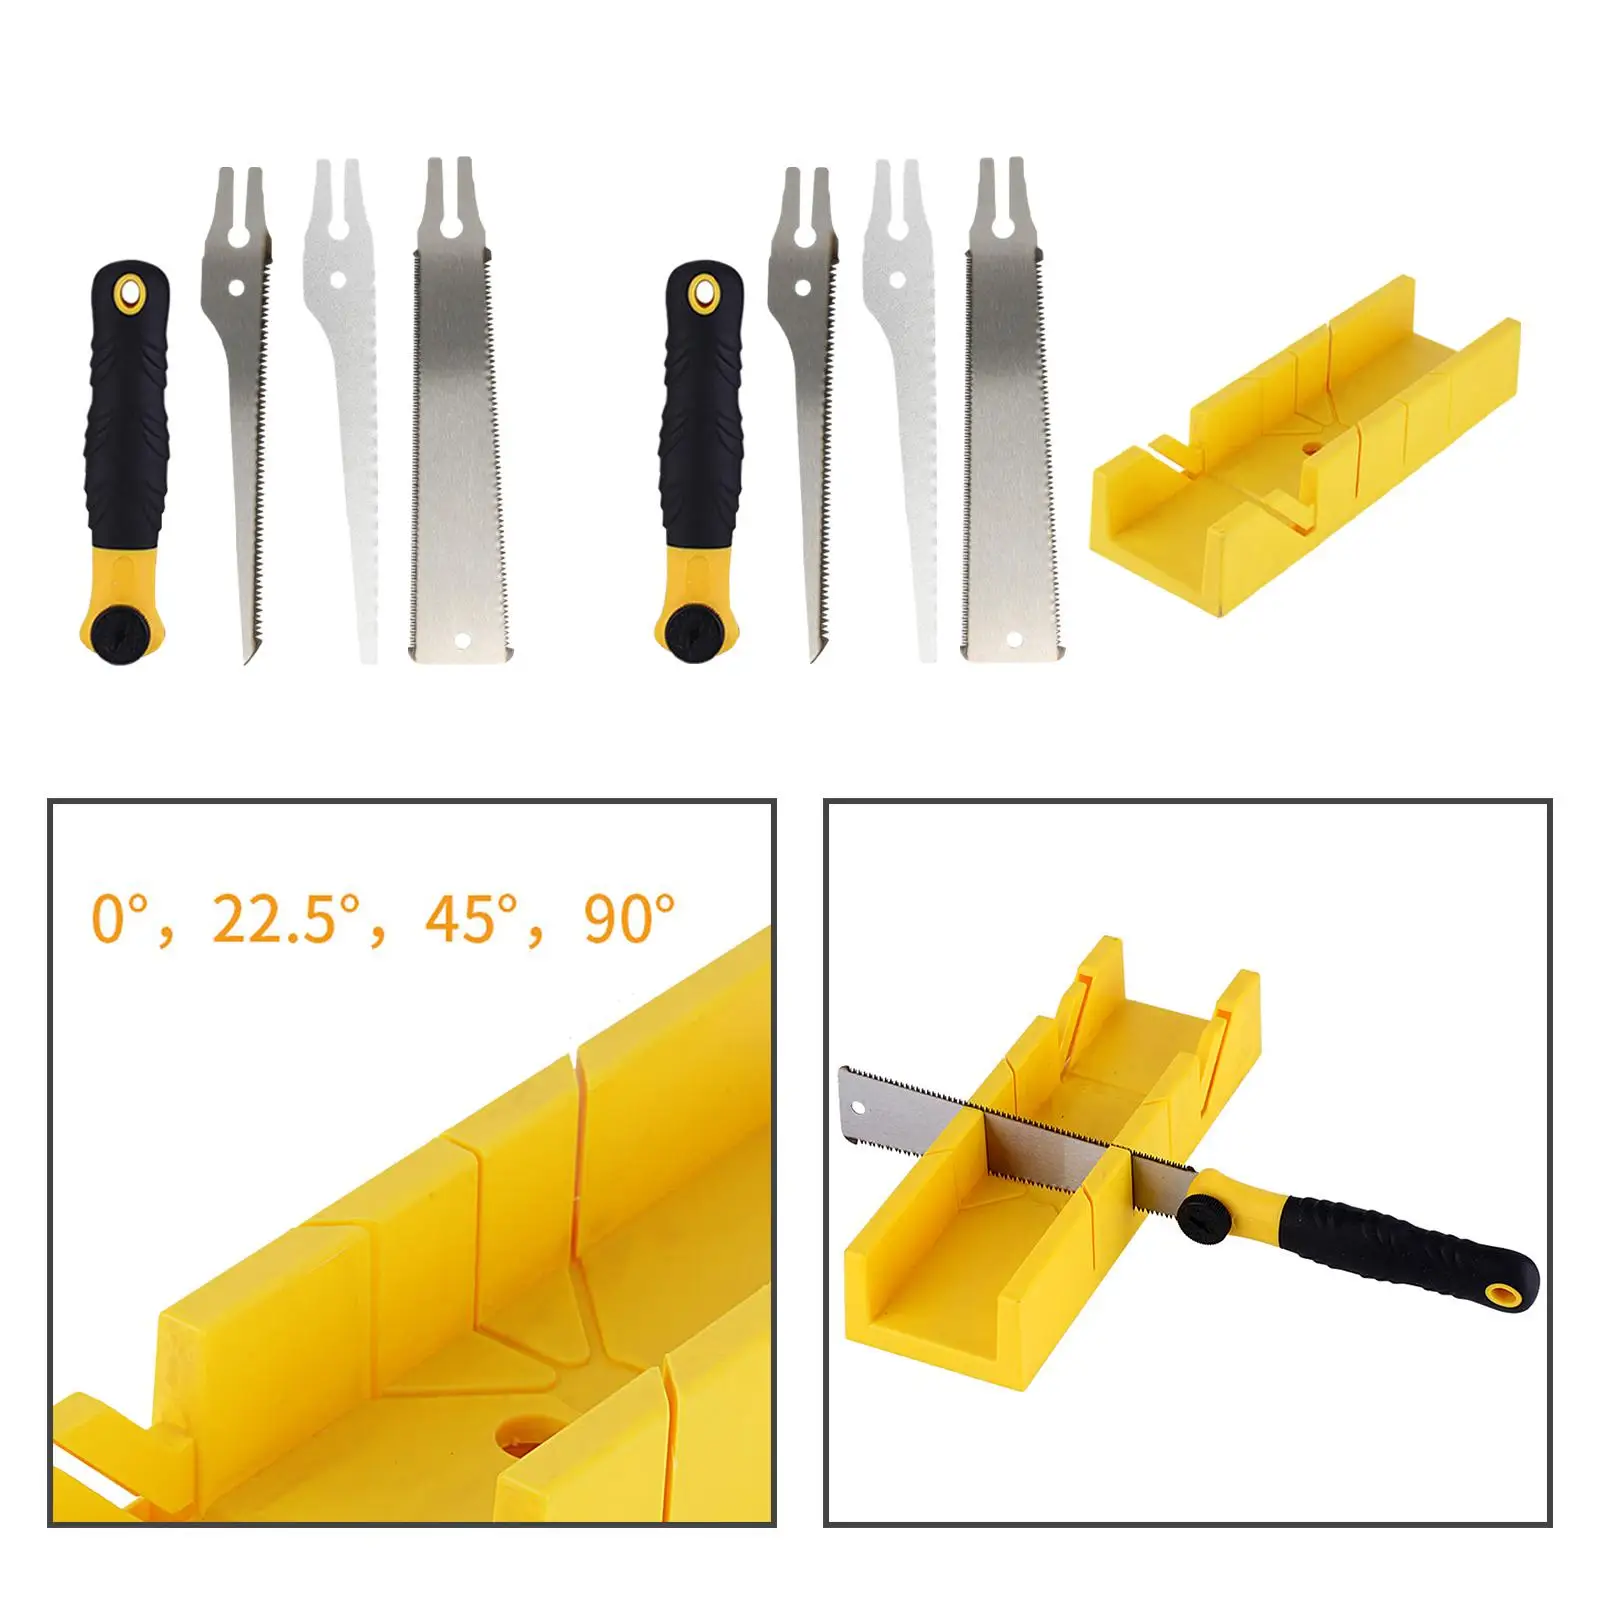 Garden Woodworking Saw Multifunctional Hand Tool Comfortable Handle Portable for Home Trimming Branches Outdoor Gardening DIY